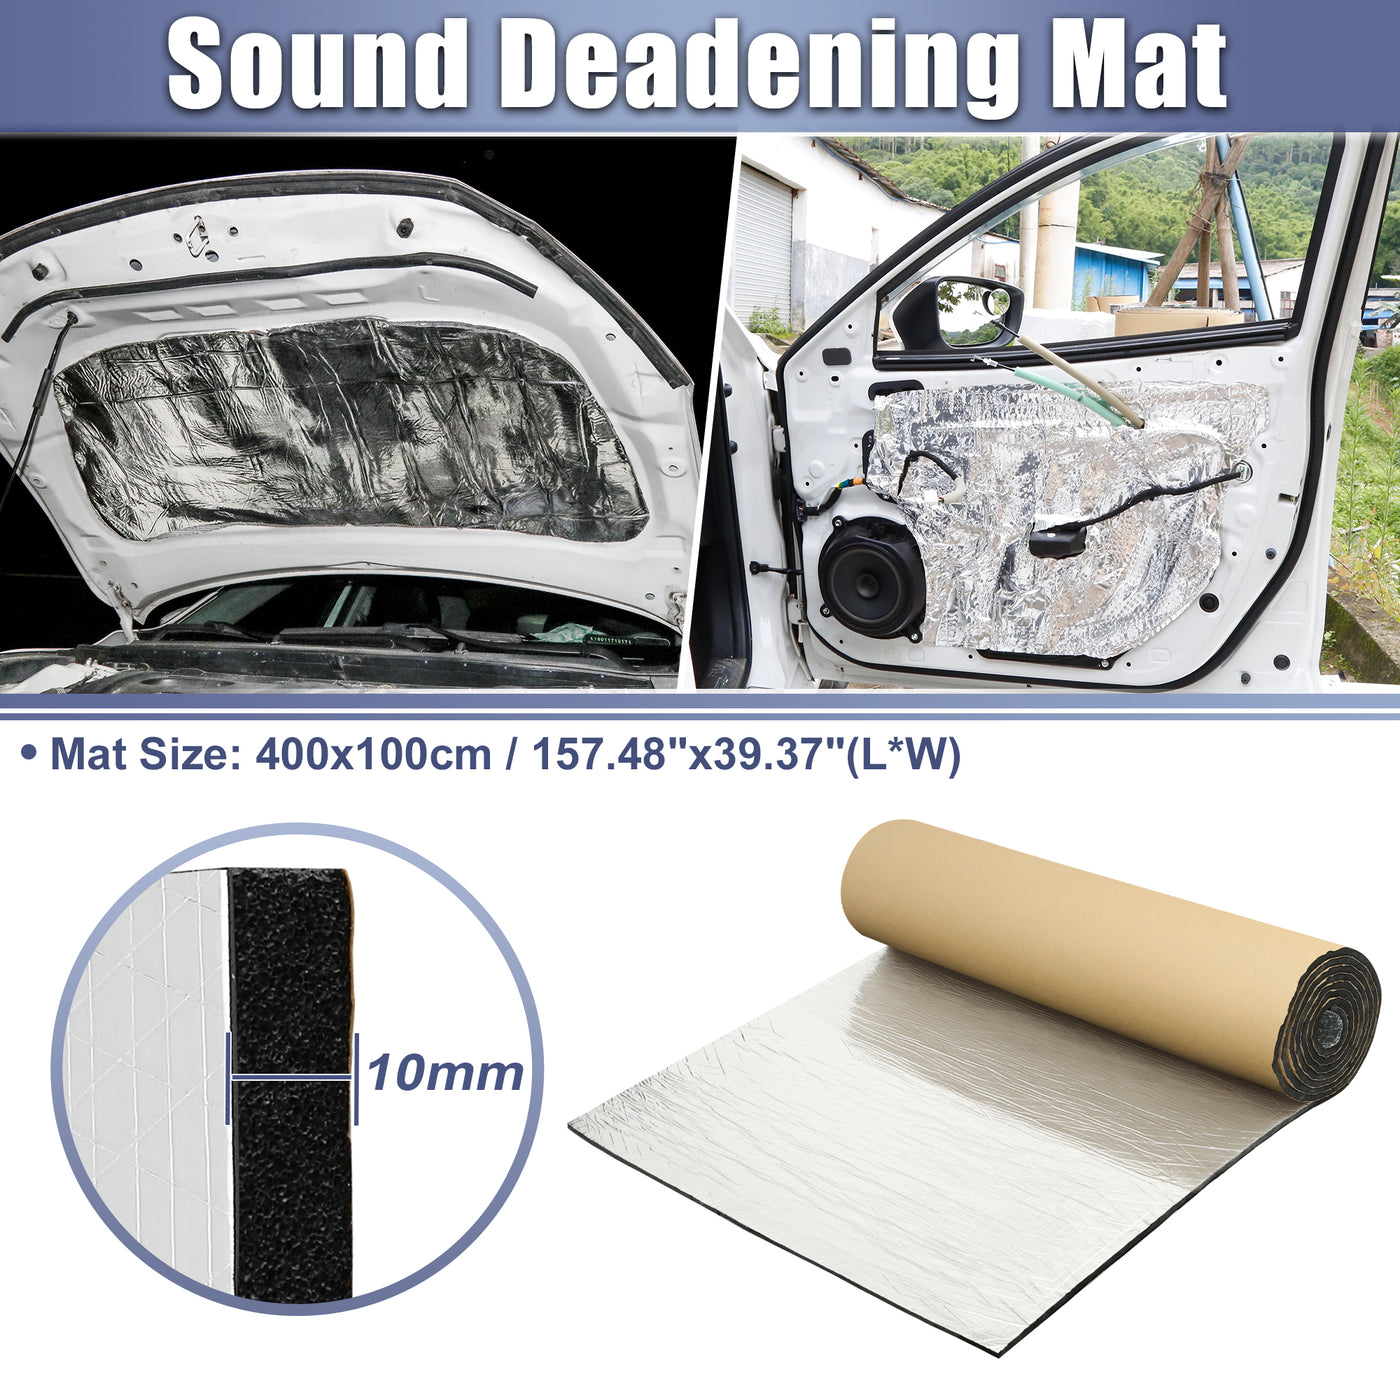 X AUTOHAUX 394mil 10mm 43.05sqft Car Sound Deadening Mat Aluminum Foil Closed Cell Foam Heat Shield Material Self Adhesive Universal for Hood Fender and Boat Engine Cover 157.48"x39.37"